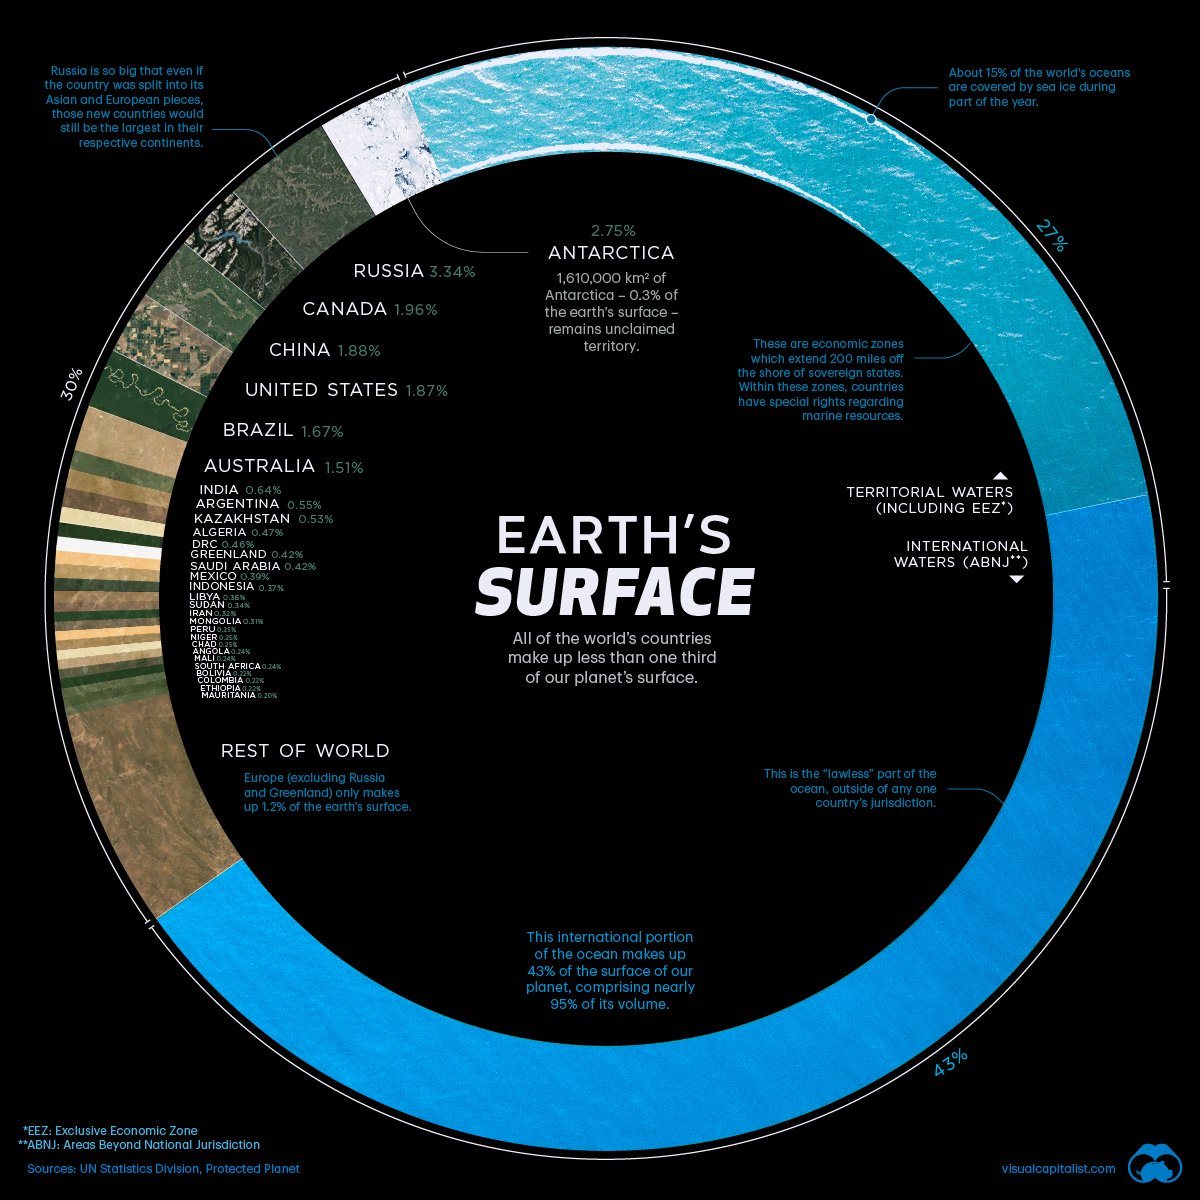 Visualizing Countries by Share of Earth's Surface buff.ly/3cfg8KM 
#planetocean